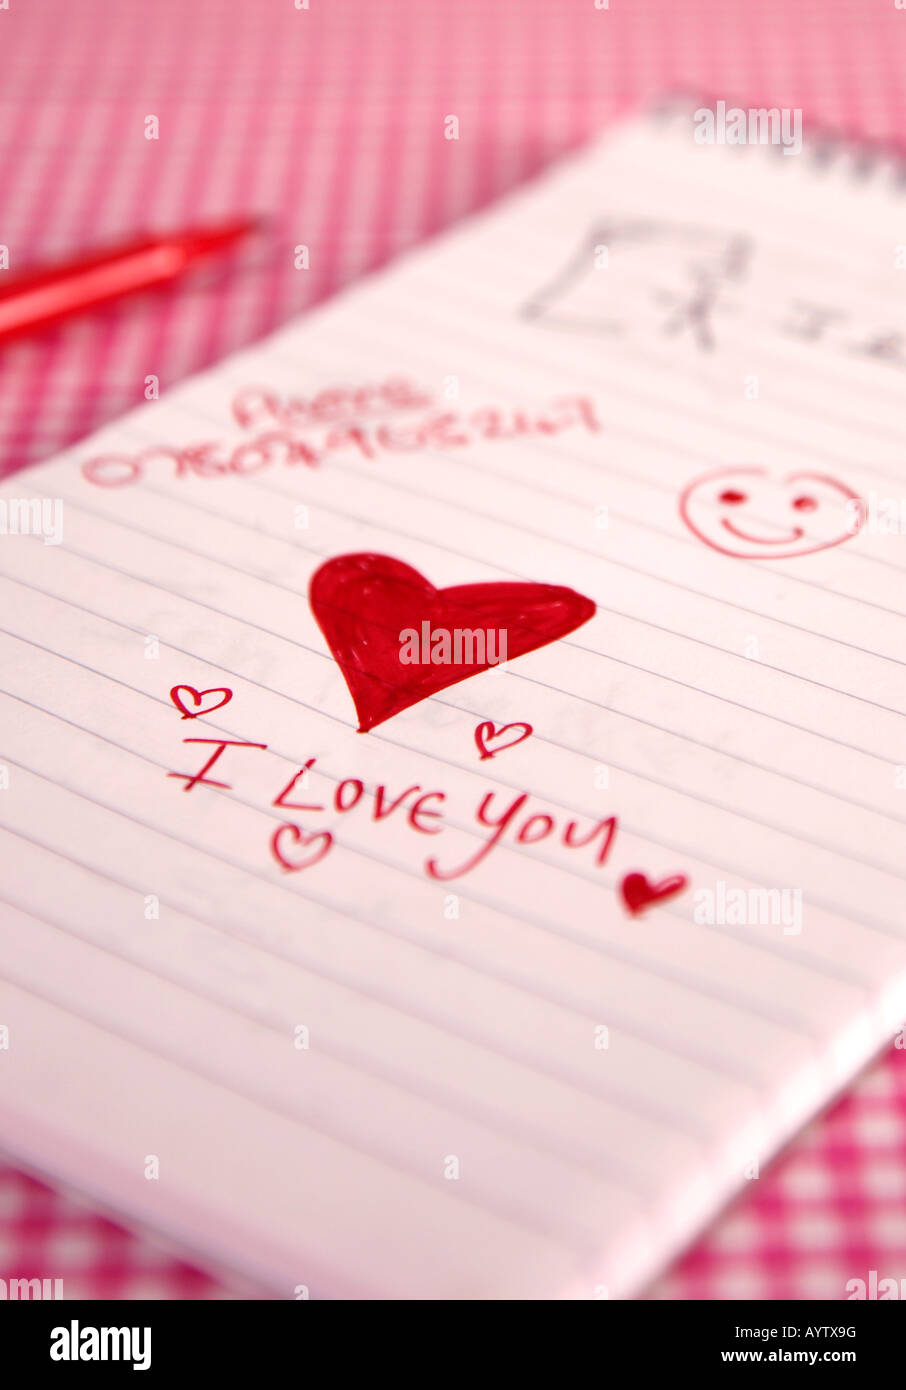 I Love You heart scribble on pad with pen Stock Photo